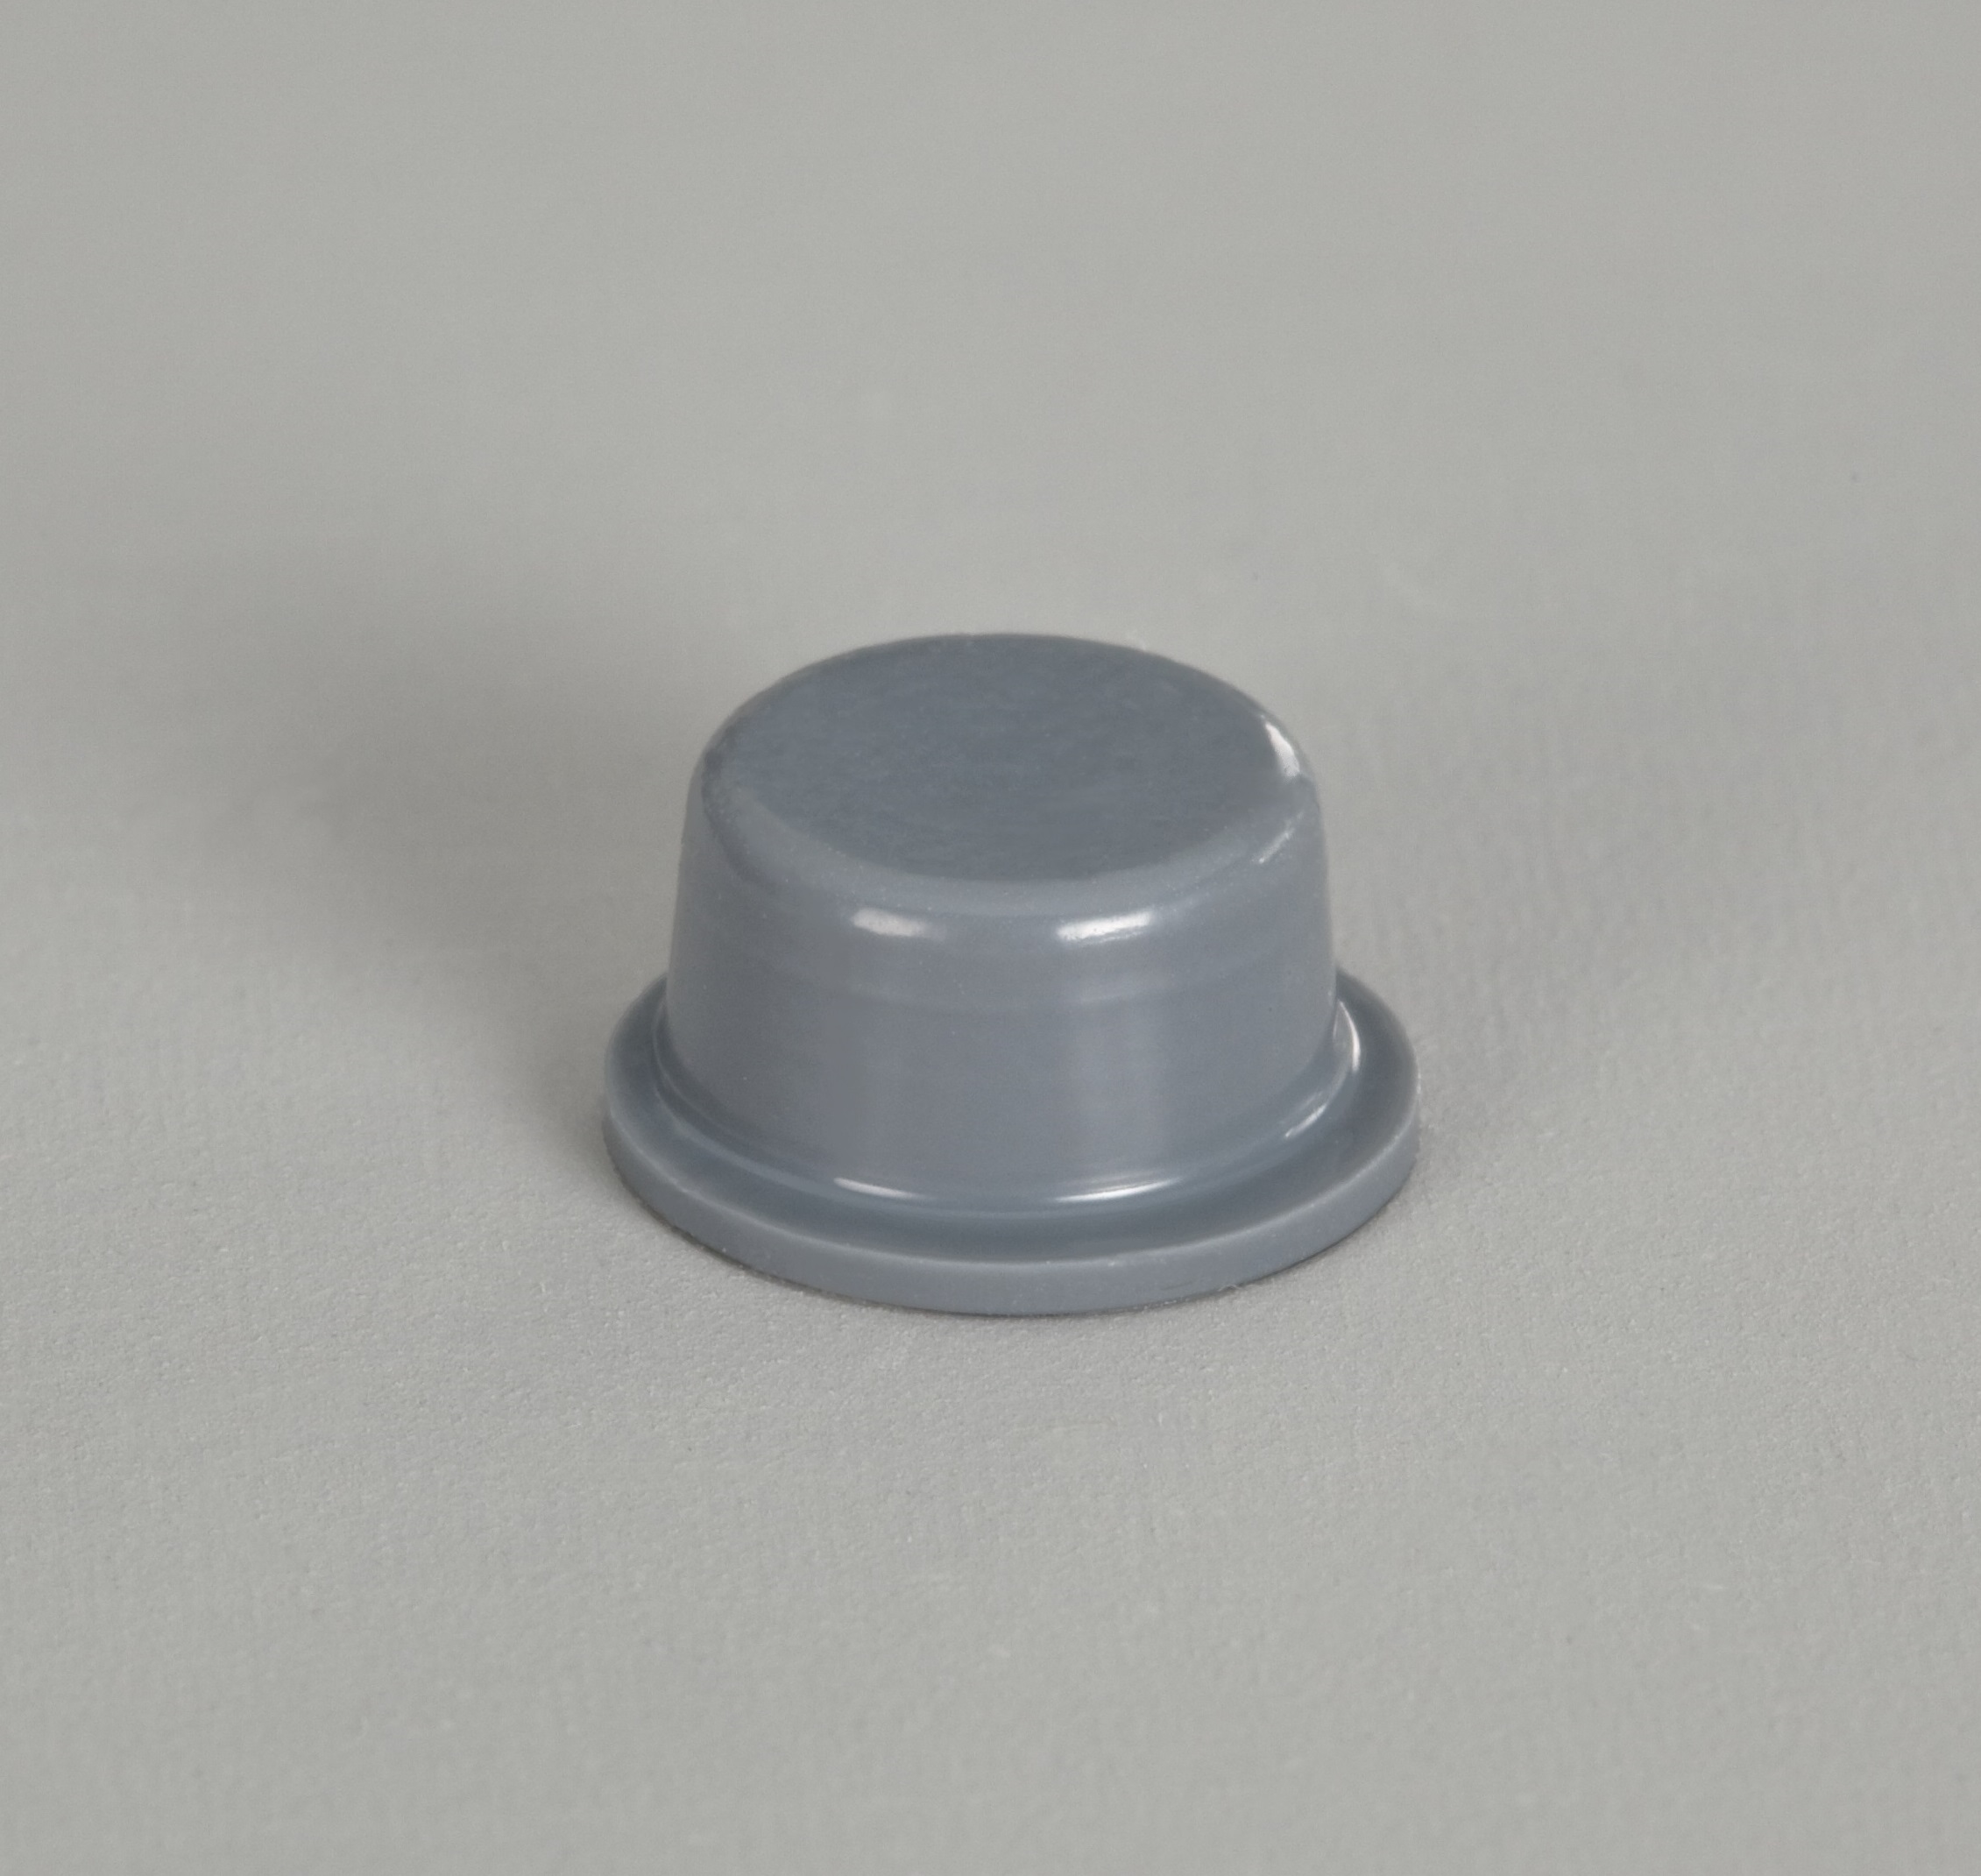 BS-35 GREY product image